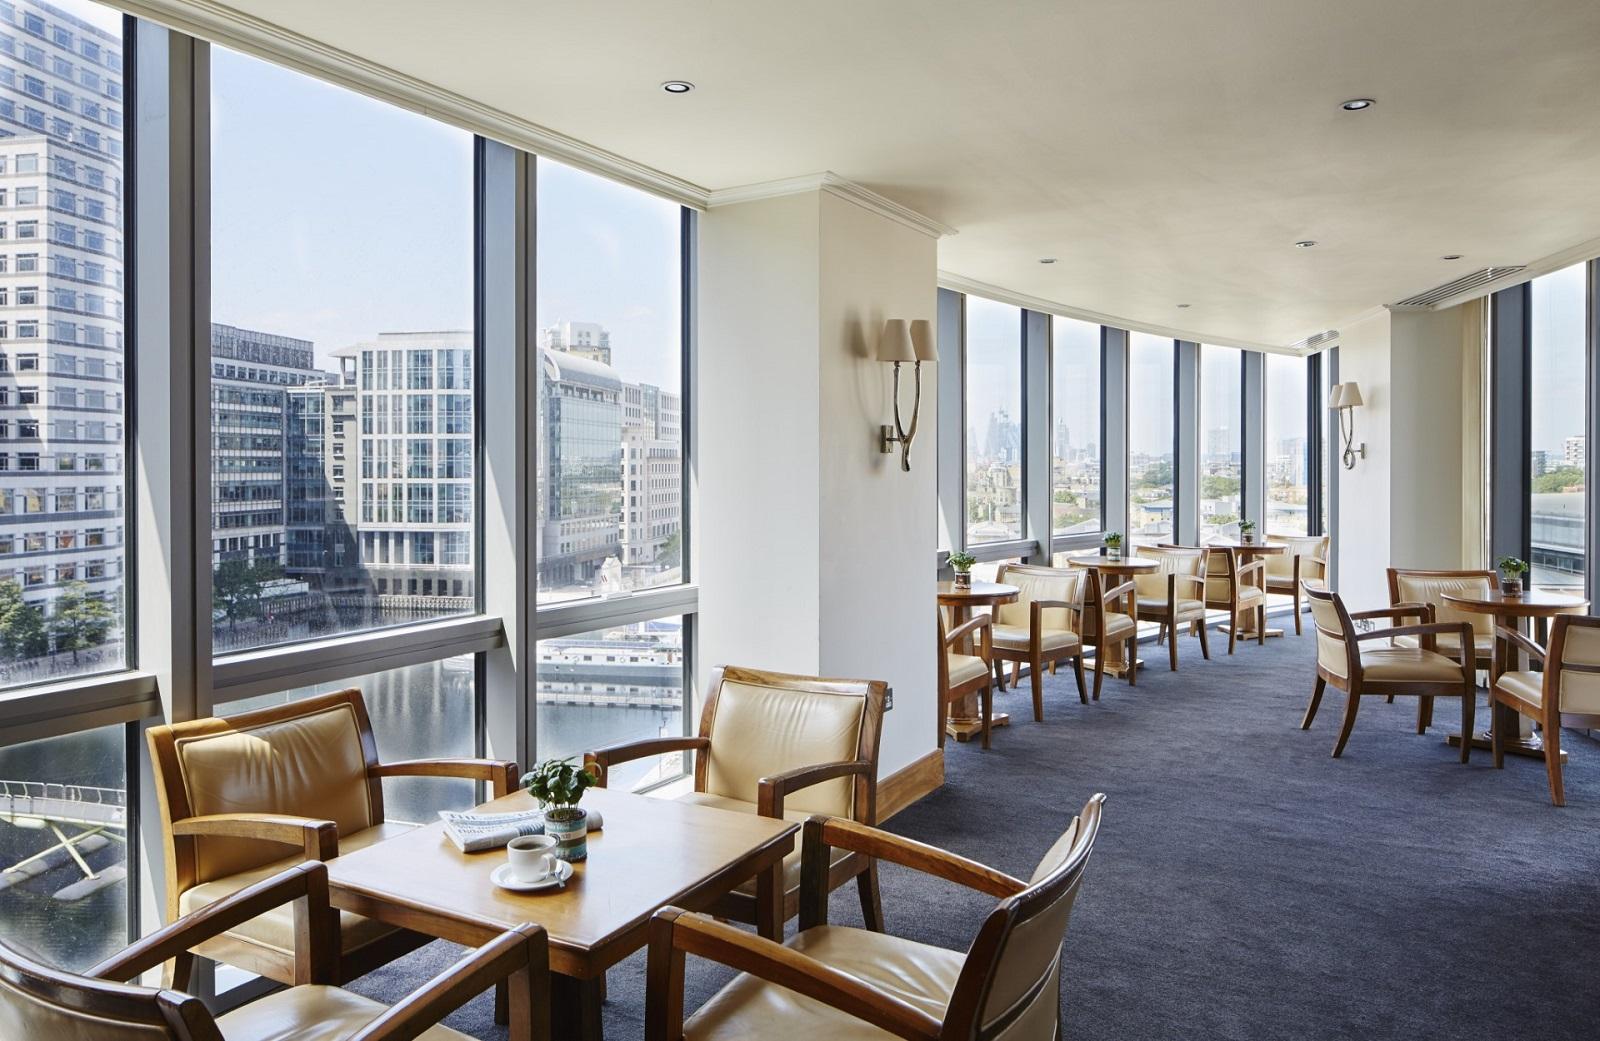 London Marriott Hotel Canary Wharf Executive Club Lounge Overview